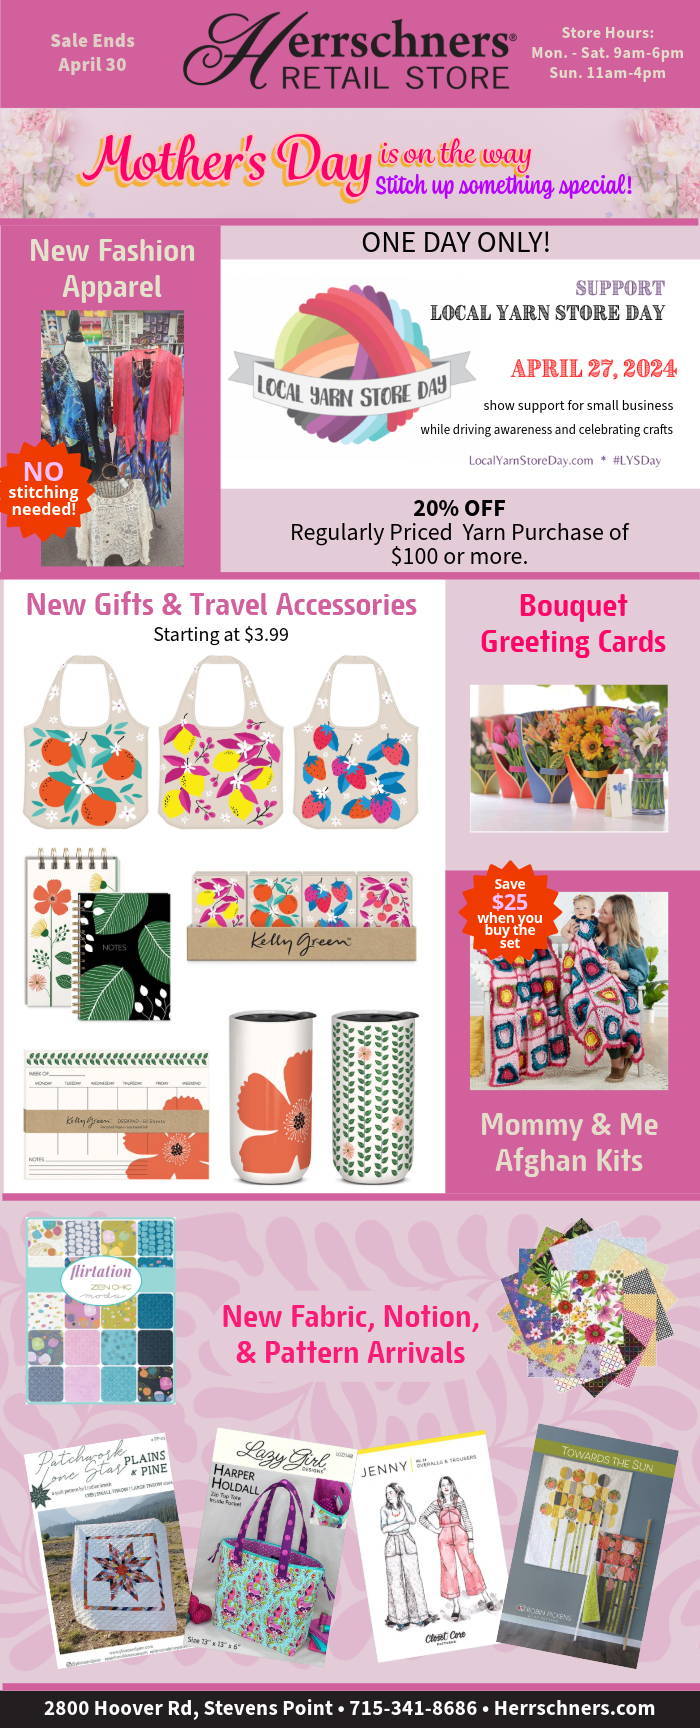 Current Retail Store Specials: Mother's Day is on the way! Local Yarn Store Day - April 27, 2024. 20% off purchases of $100+ Image: Featured retail apparel, crafts, kits, and supplies.